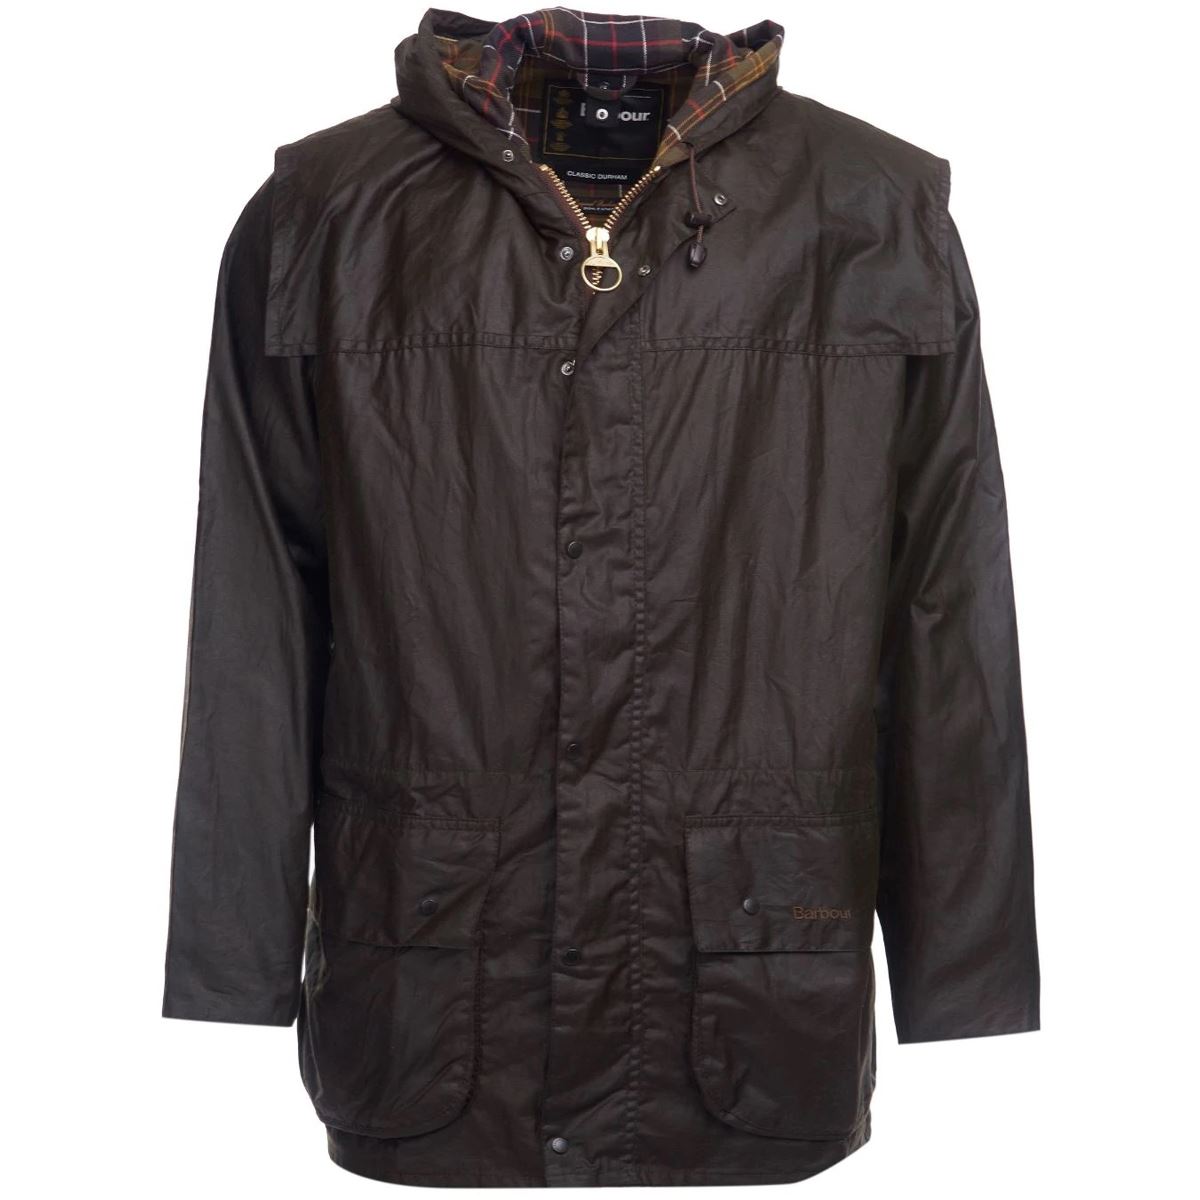 How long is the Barbour Durham Jacket?